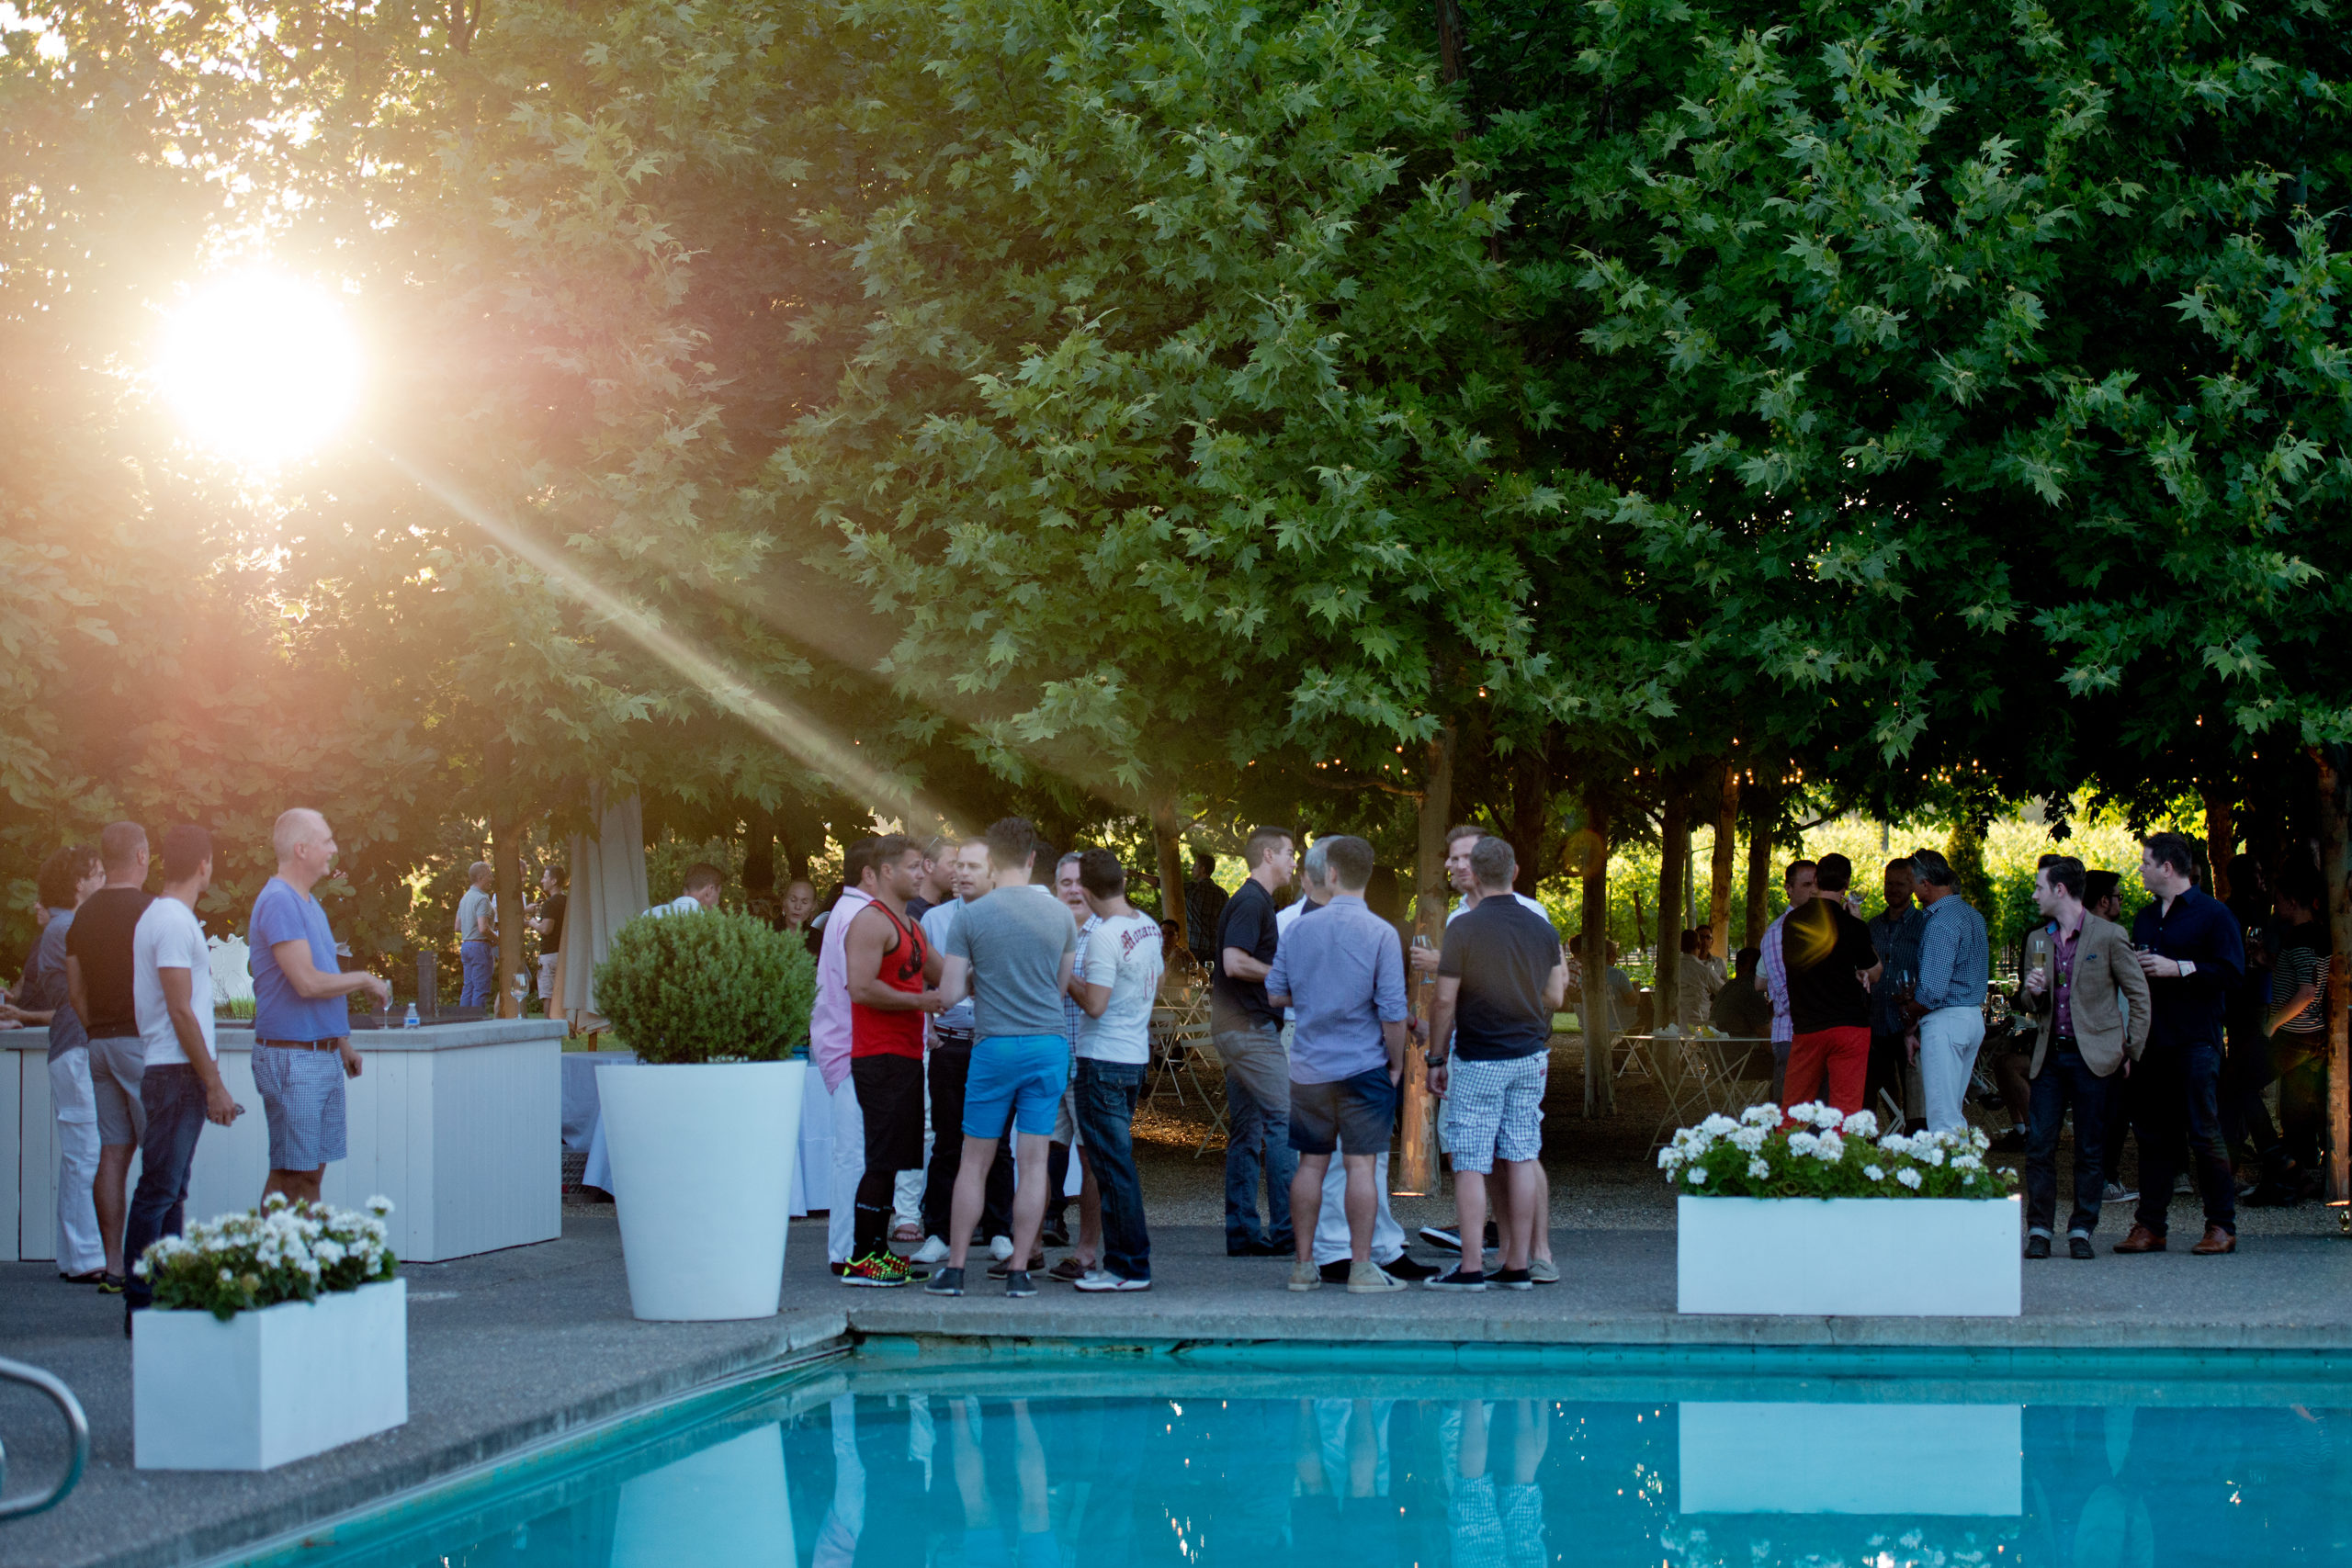 Visitors socialize around the pool during Out in the Vineyard's Twilight T-Dance at Raymond Vineyards, benefitting Face to Face Sonoma County AIDS Network, during Gay Wine Weekend in St. Helena, California, on June 14, 2014. (Alvin Jornada / For The Press Democrat)